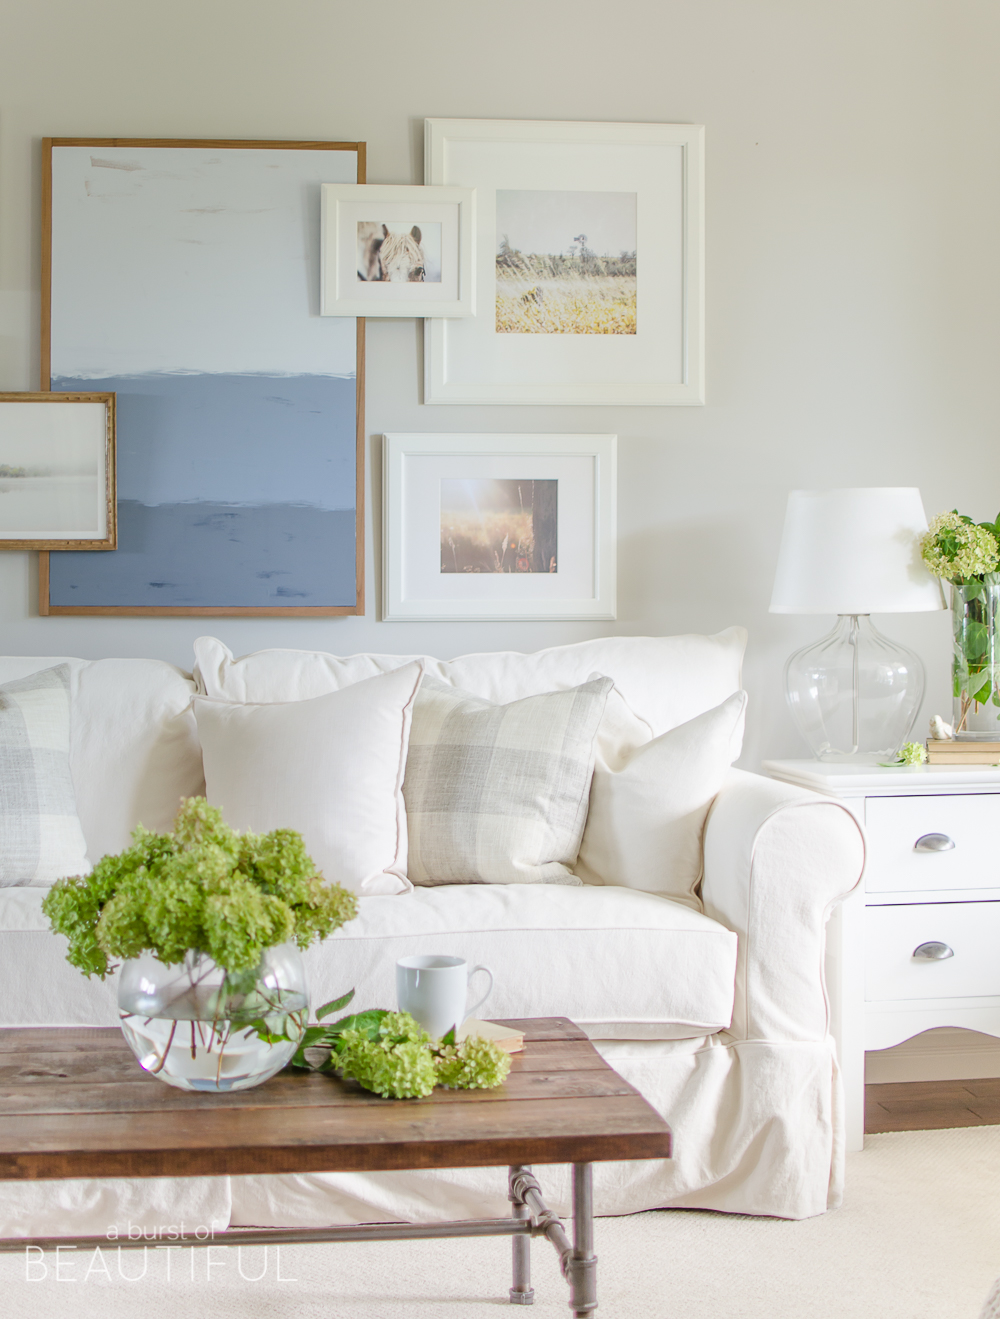 A white slipcovered sofa creates a casual and relaxed feel in this modern farmhouse